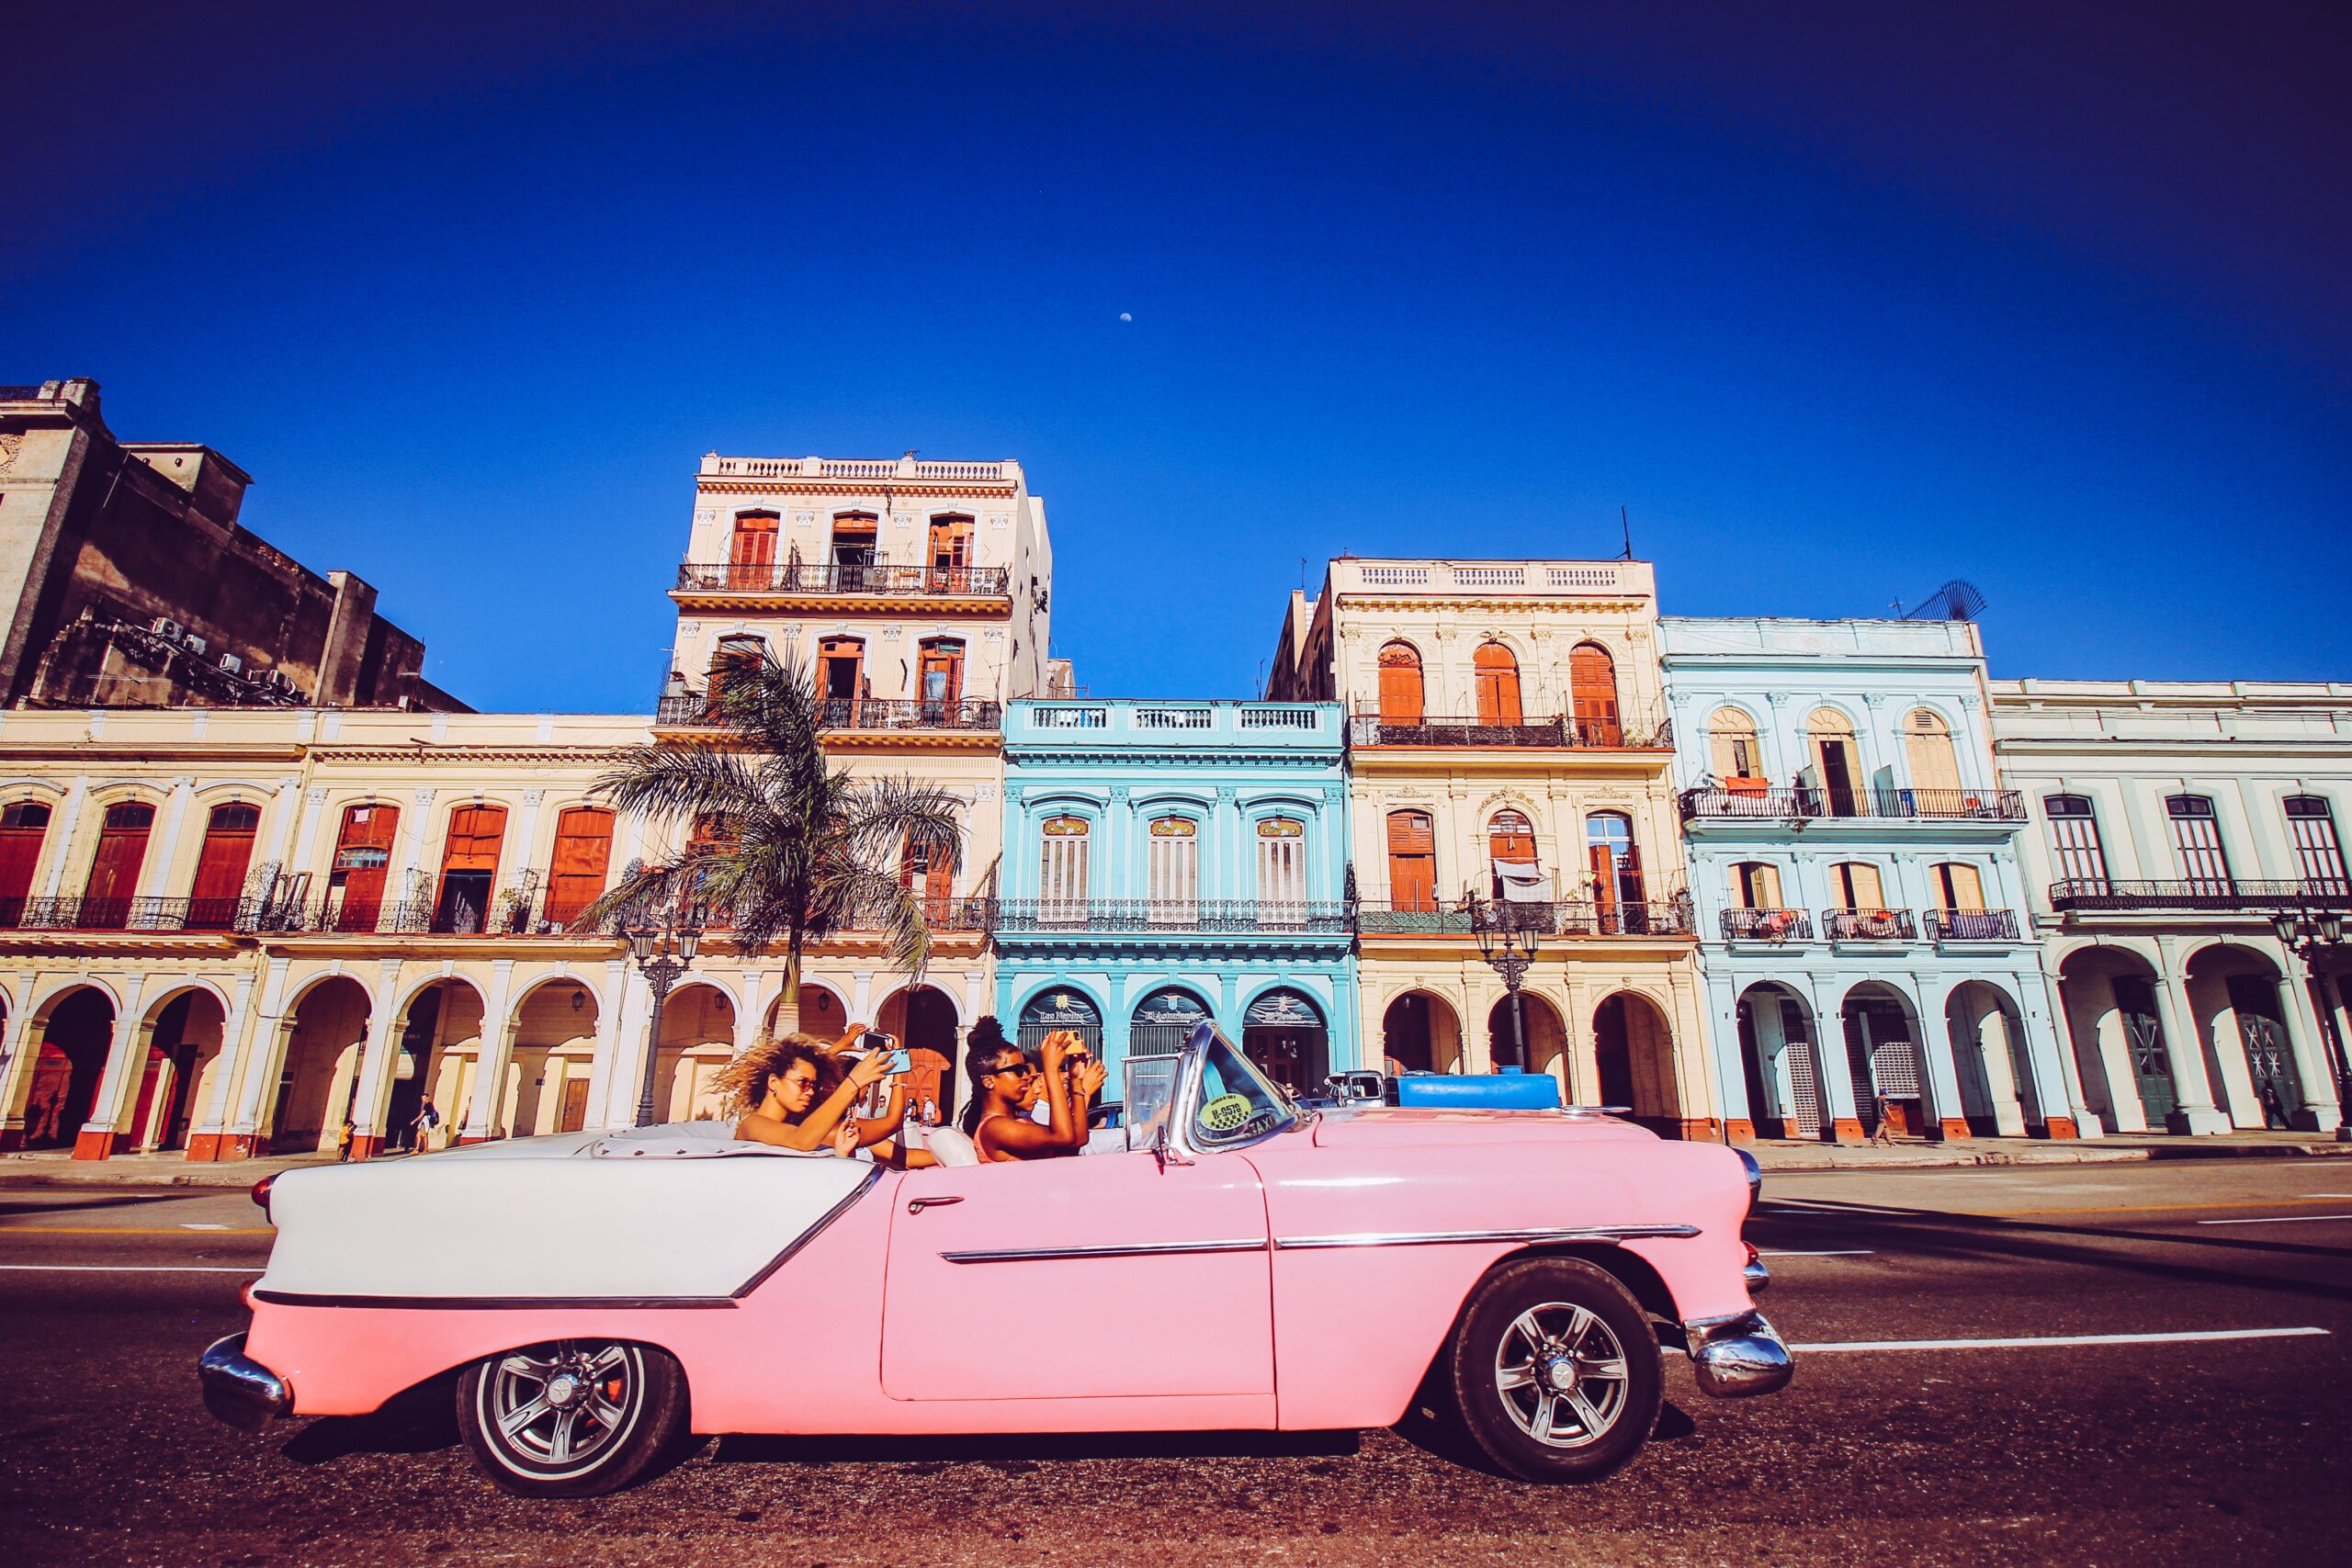 Pink cadillac car with tourists drives past colonial homes in Old Havana